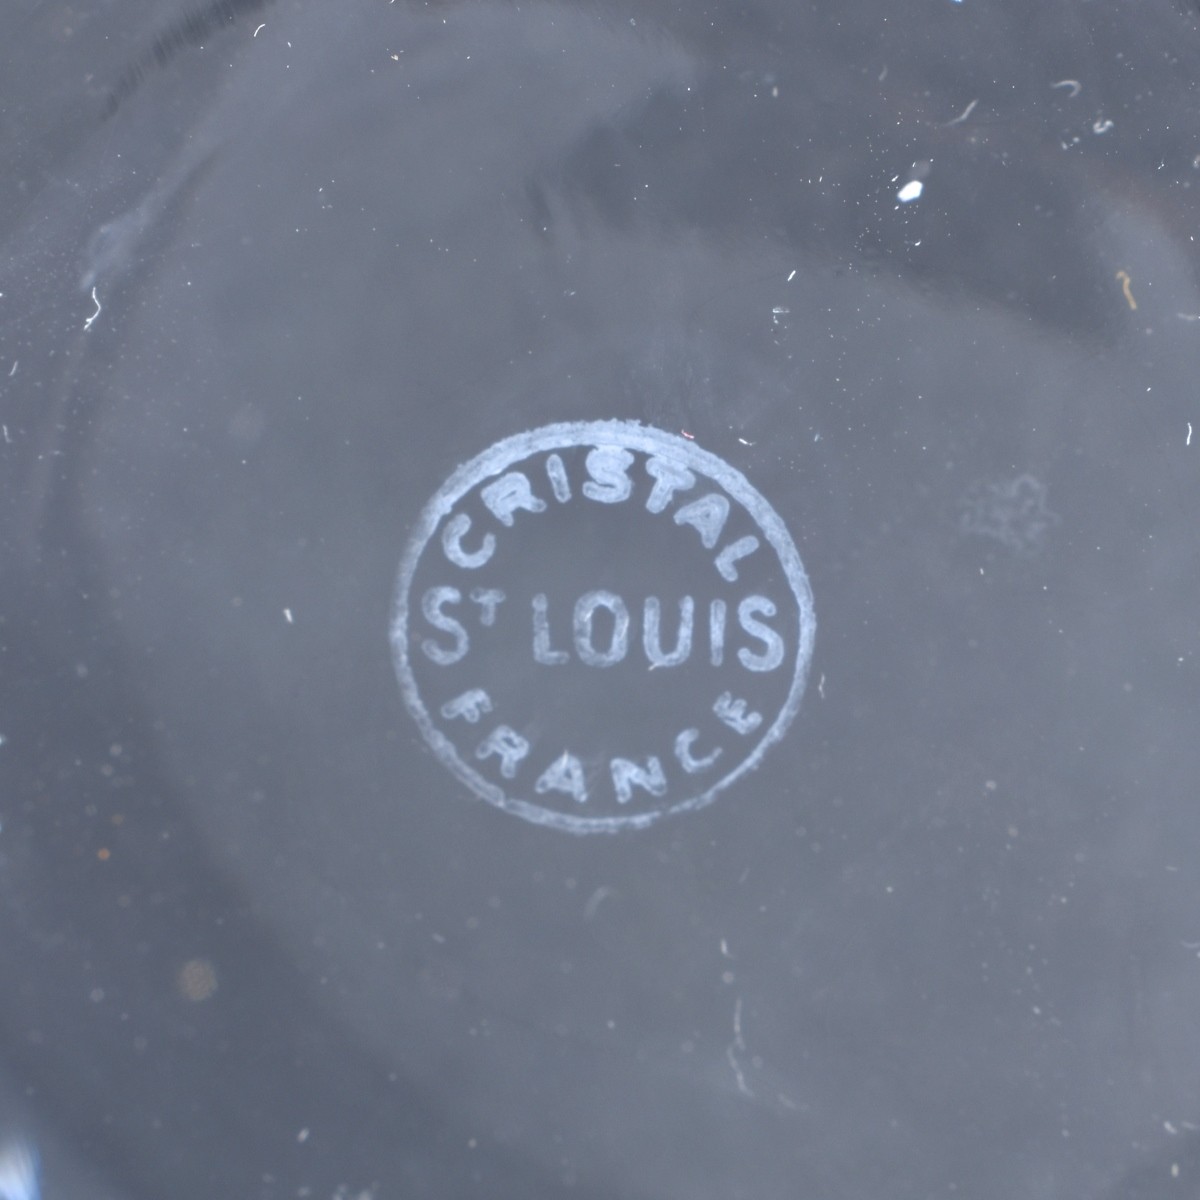 St Louis Bowls and /Underplates